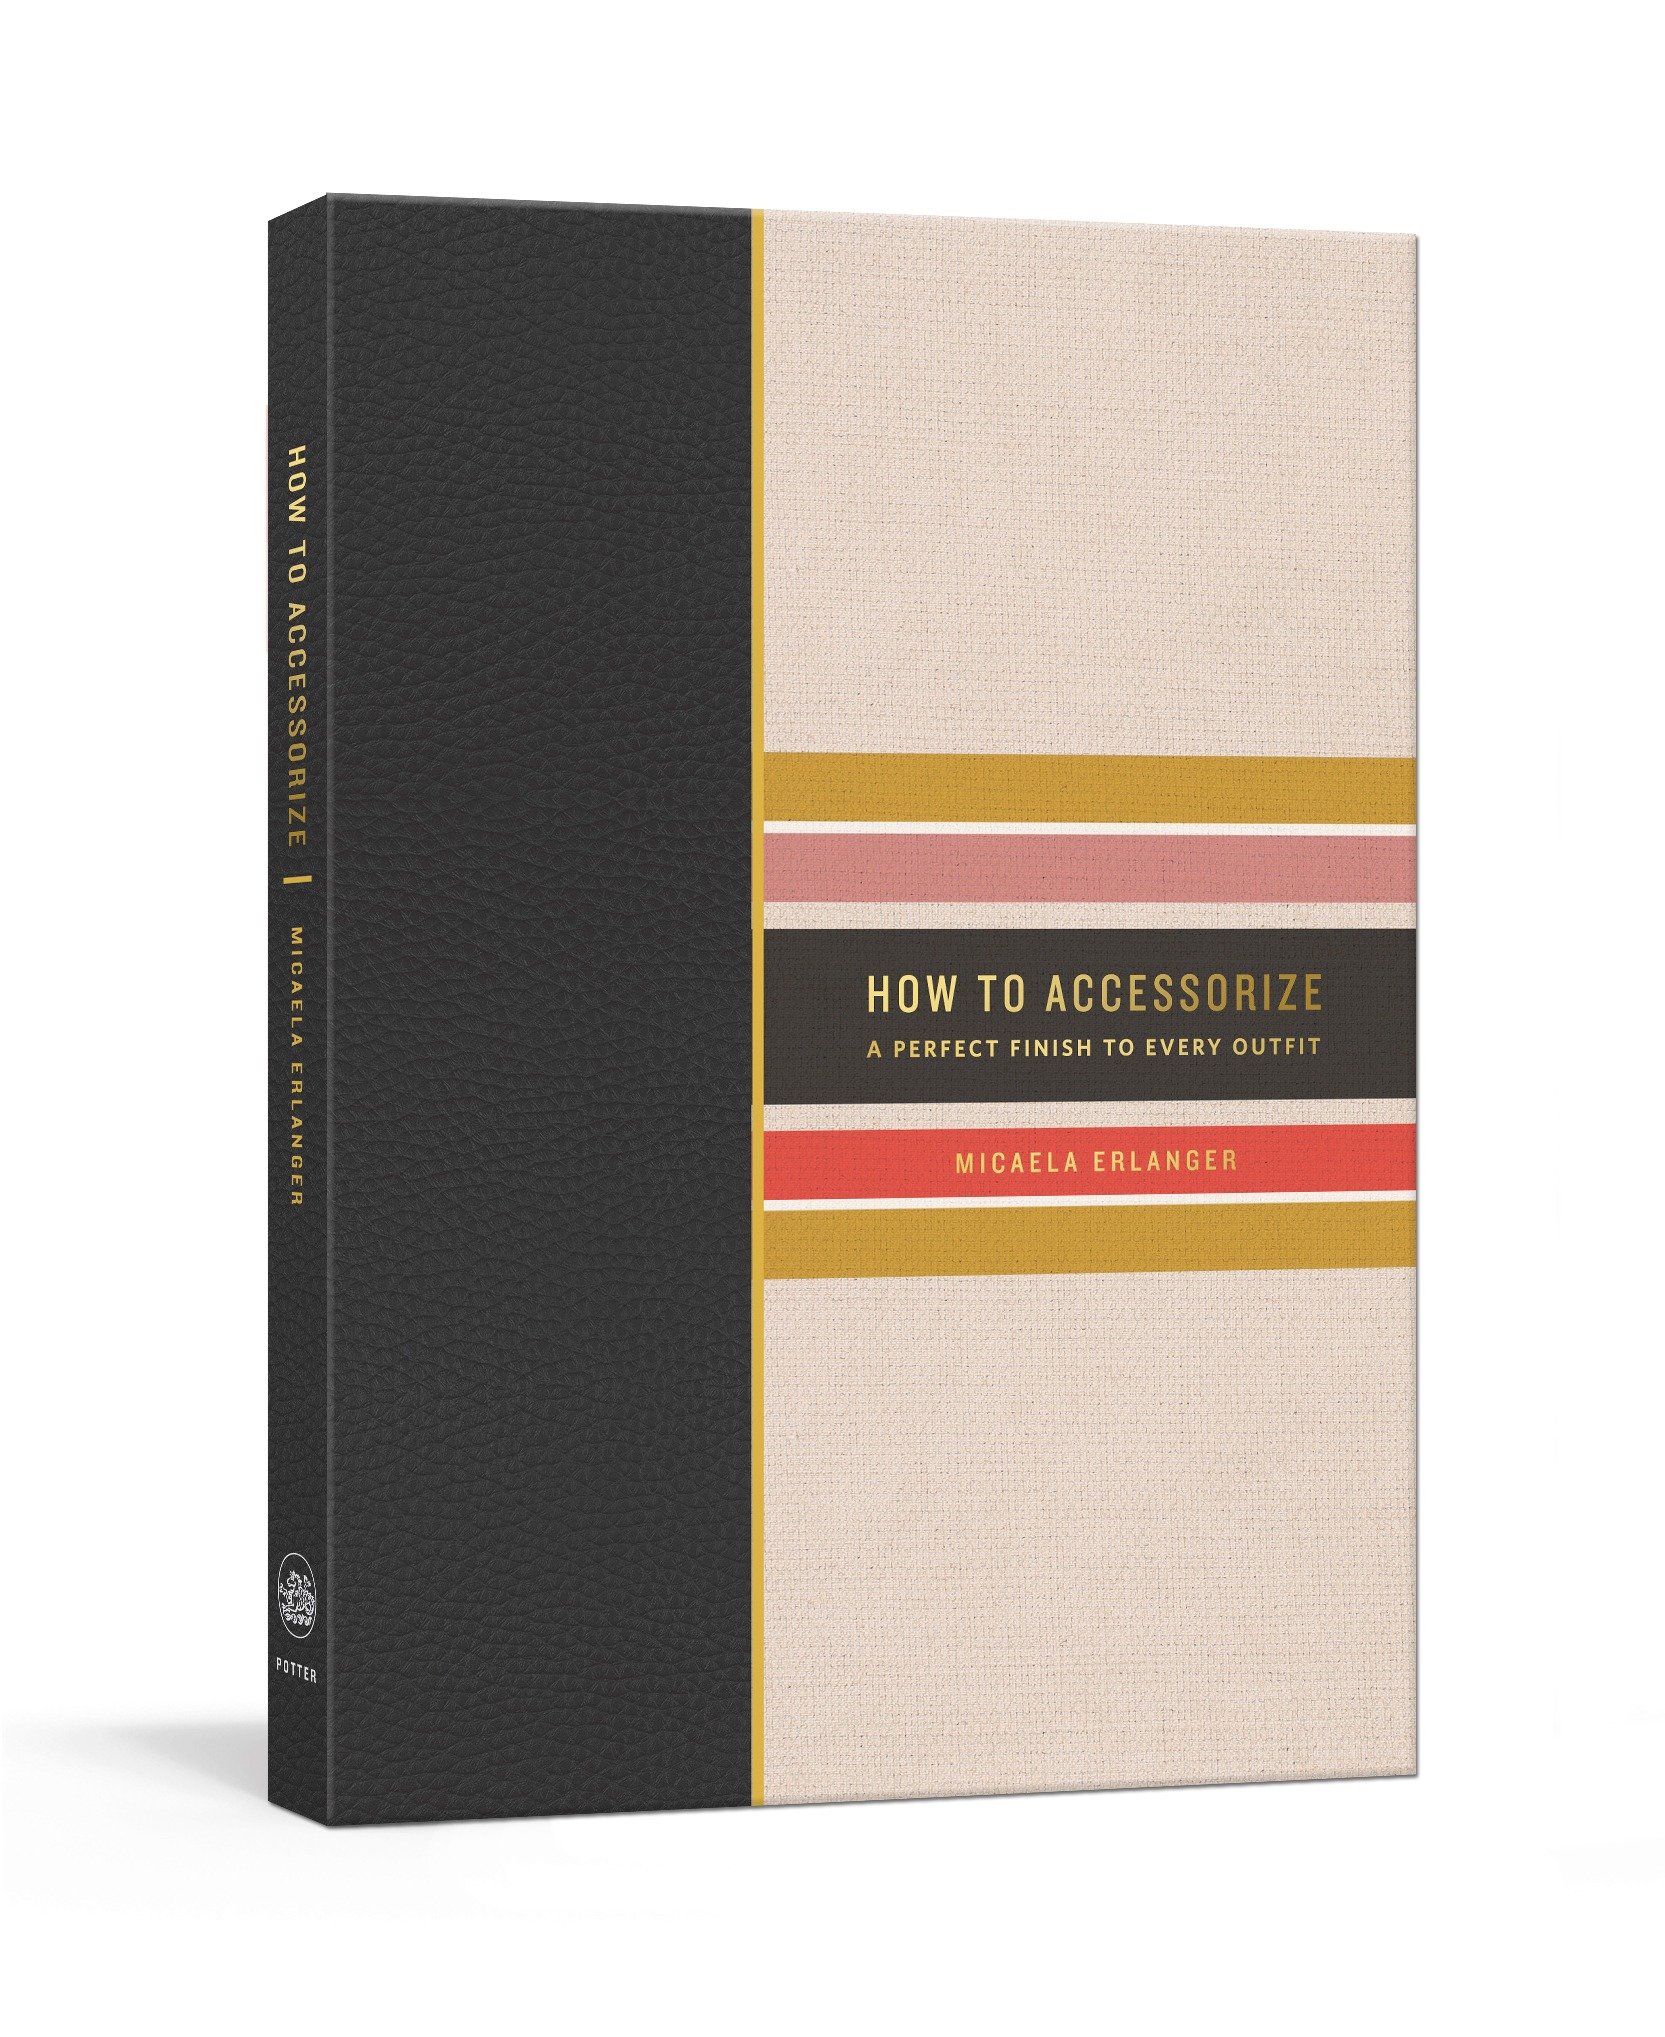 How To Accessorize (Hardcover Book)